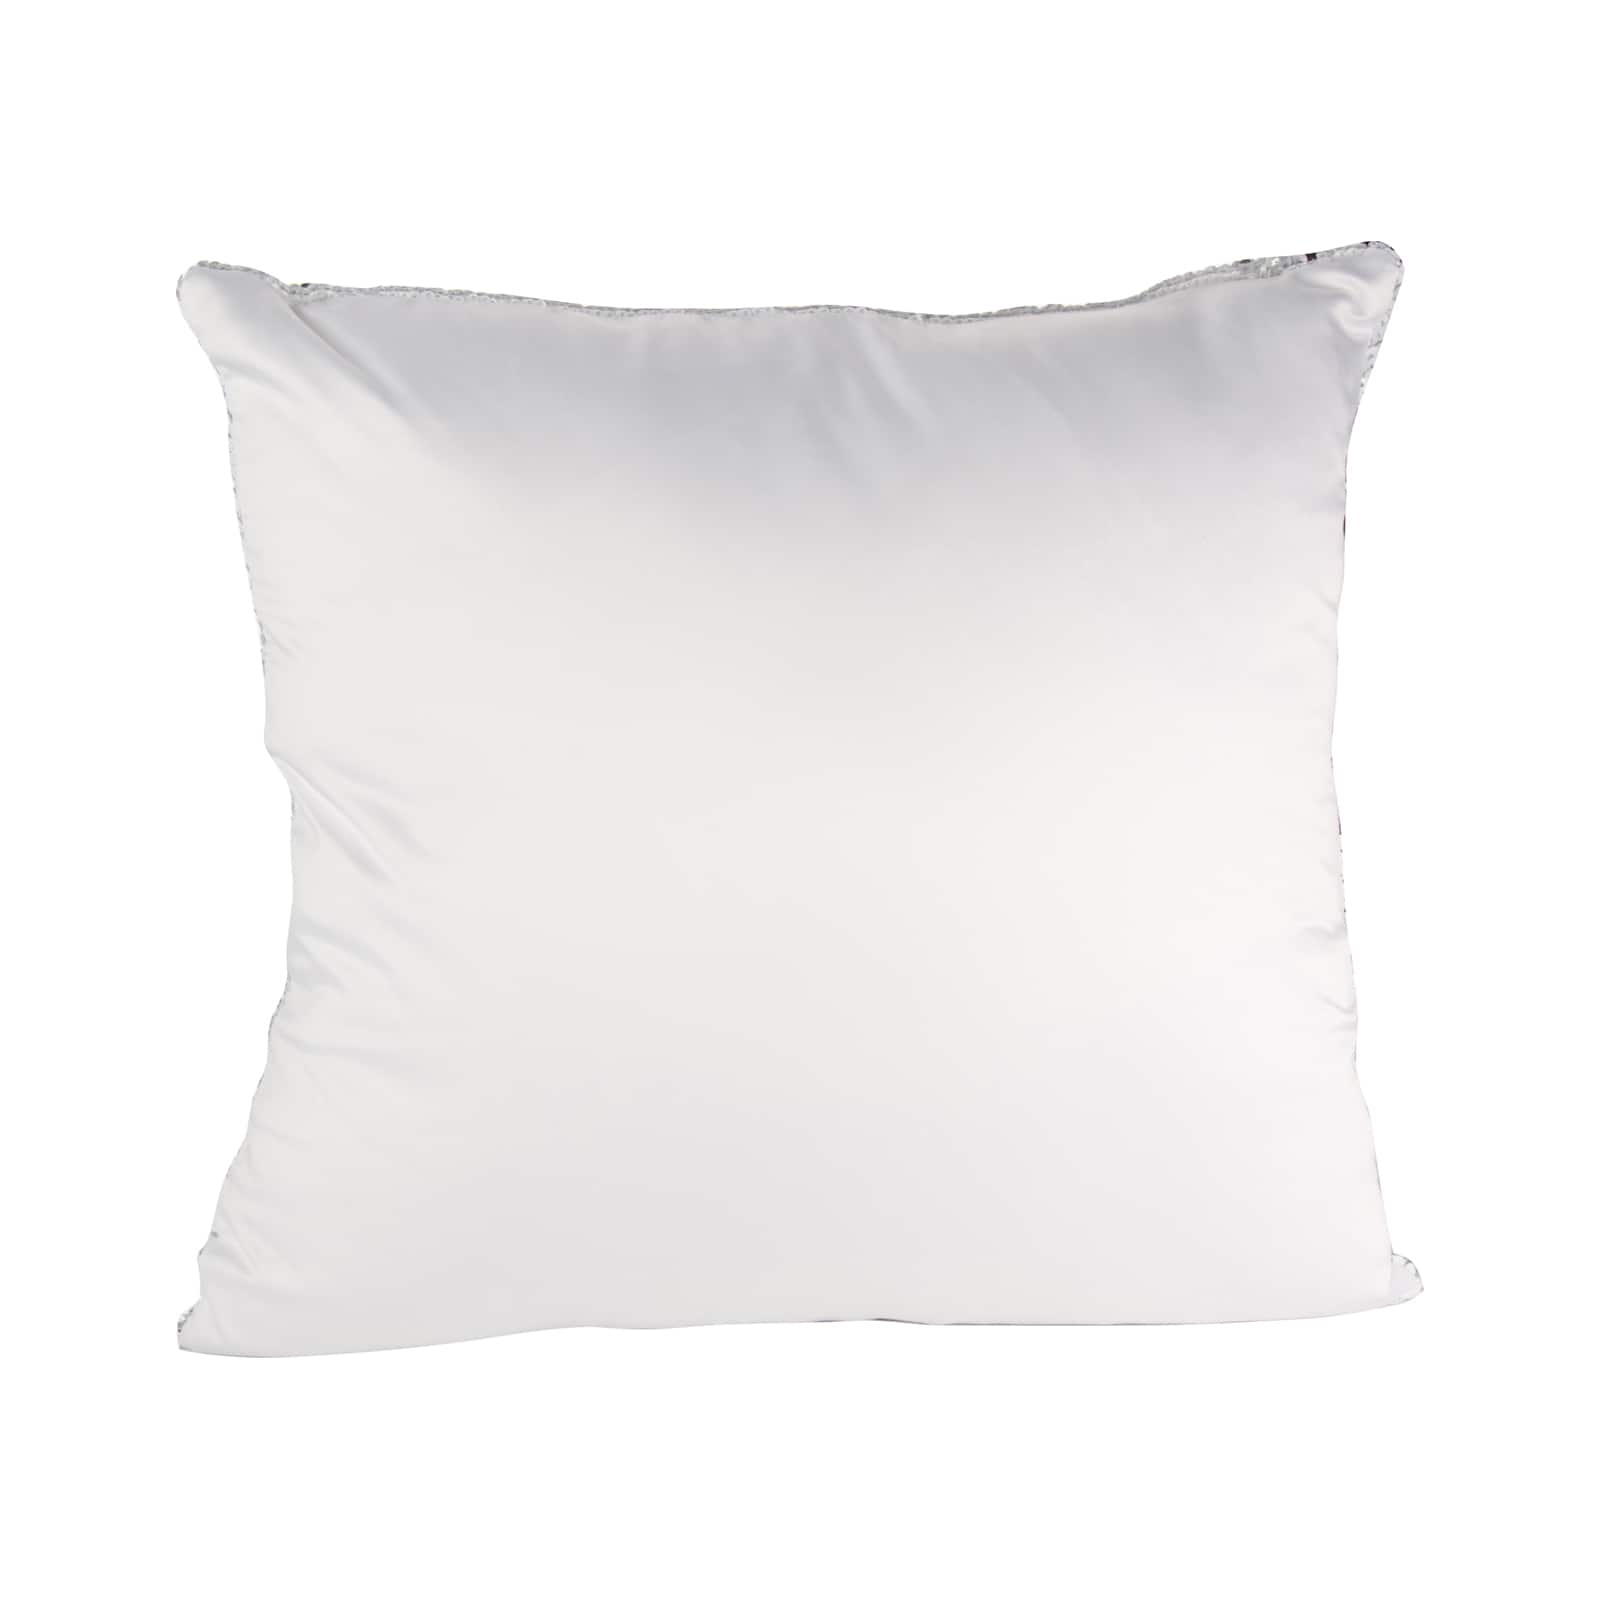 Craft Express Sublimation Flip Sequin Pillow Covers, 4ct.